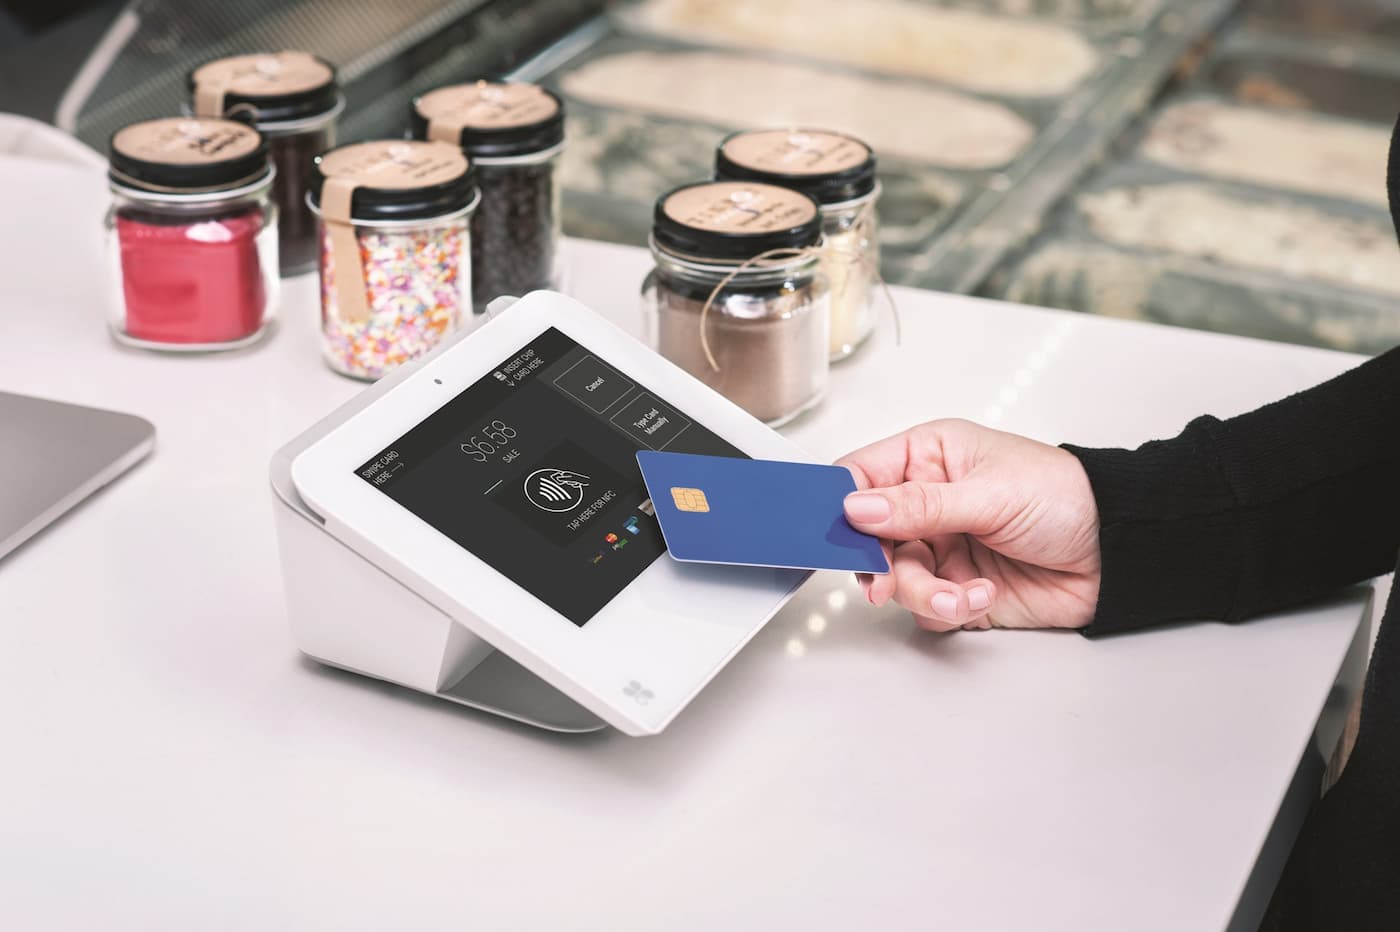 Credit card processing in 8 simple steps - Clover Blog